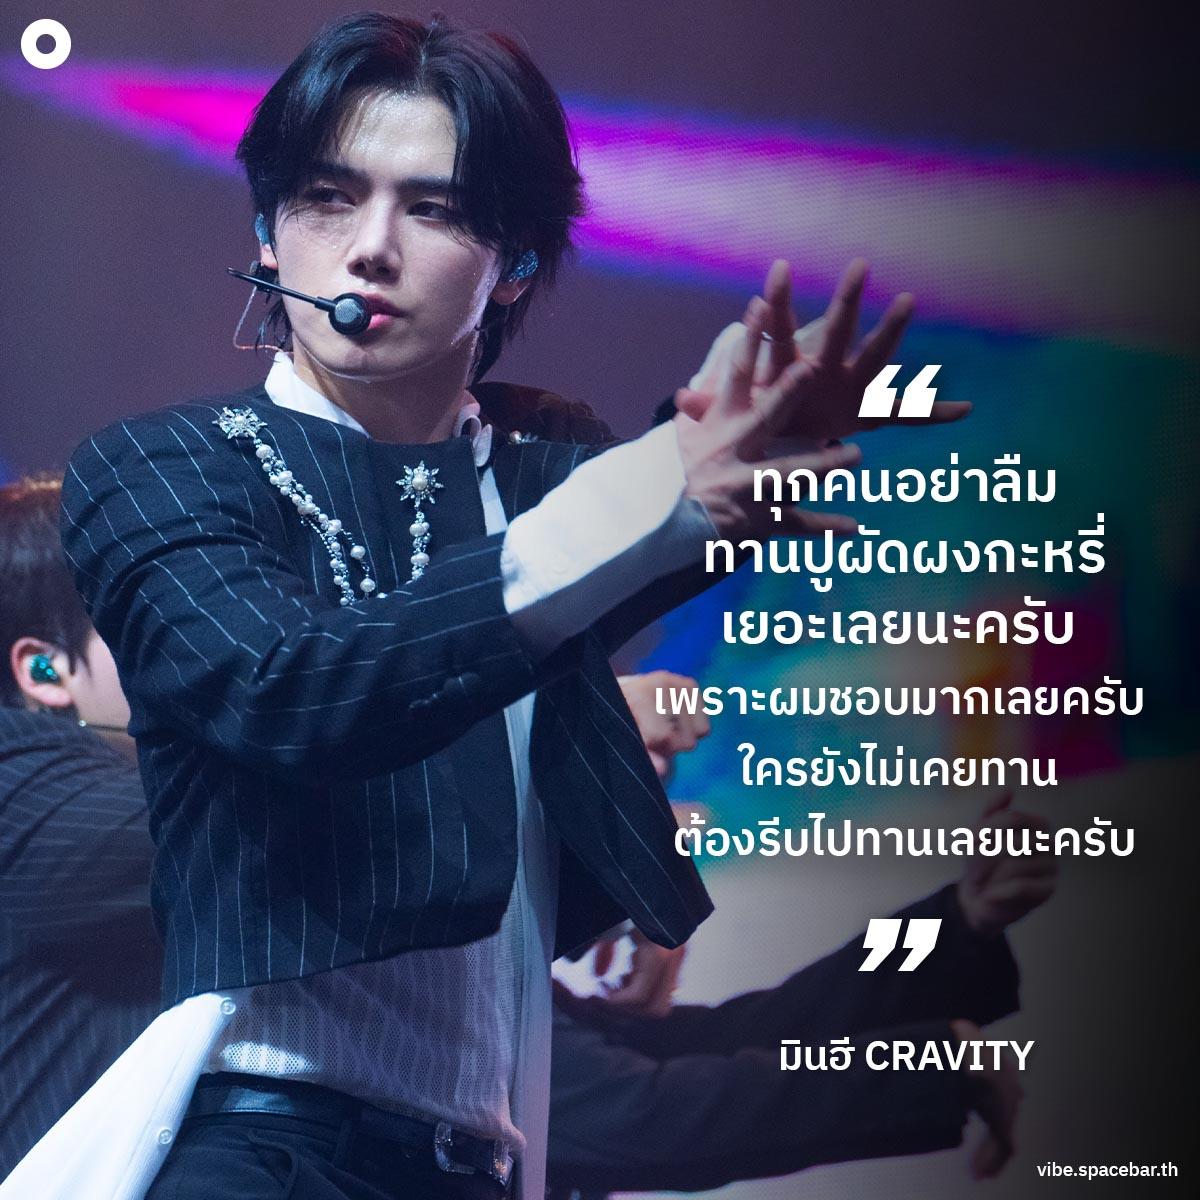 Think-thing-messages-from-cravity-to-thai-luvity-SPACEBAR-Photo06.jpg